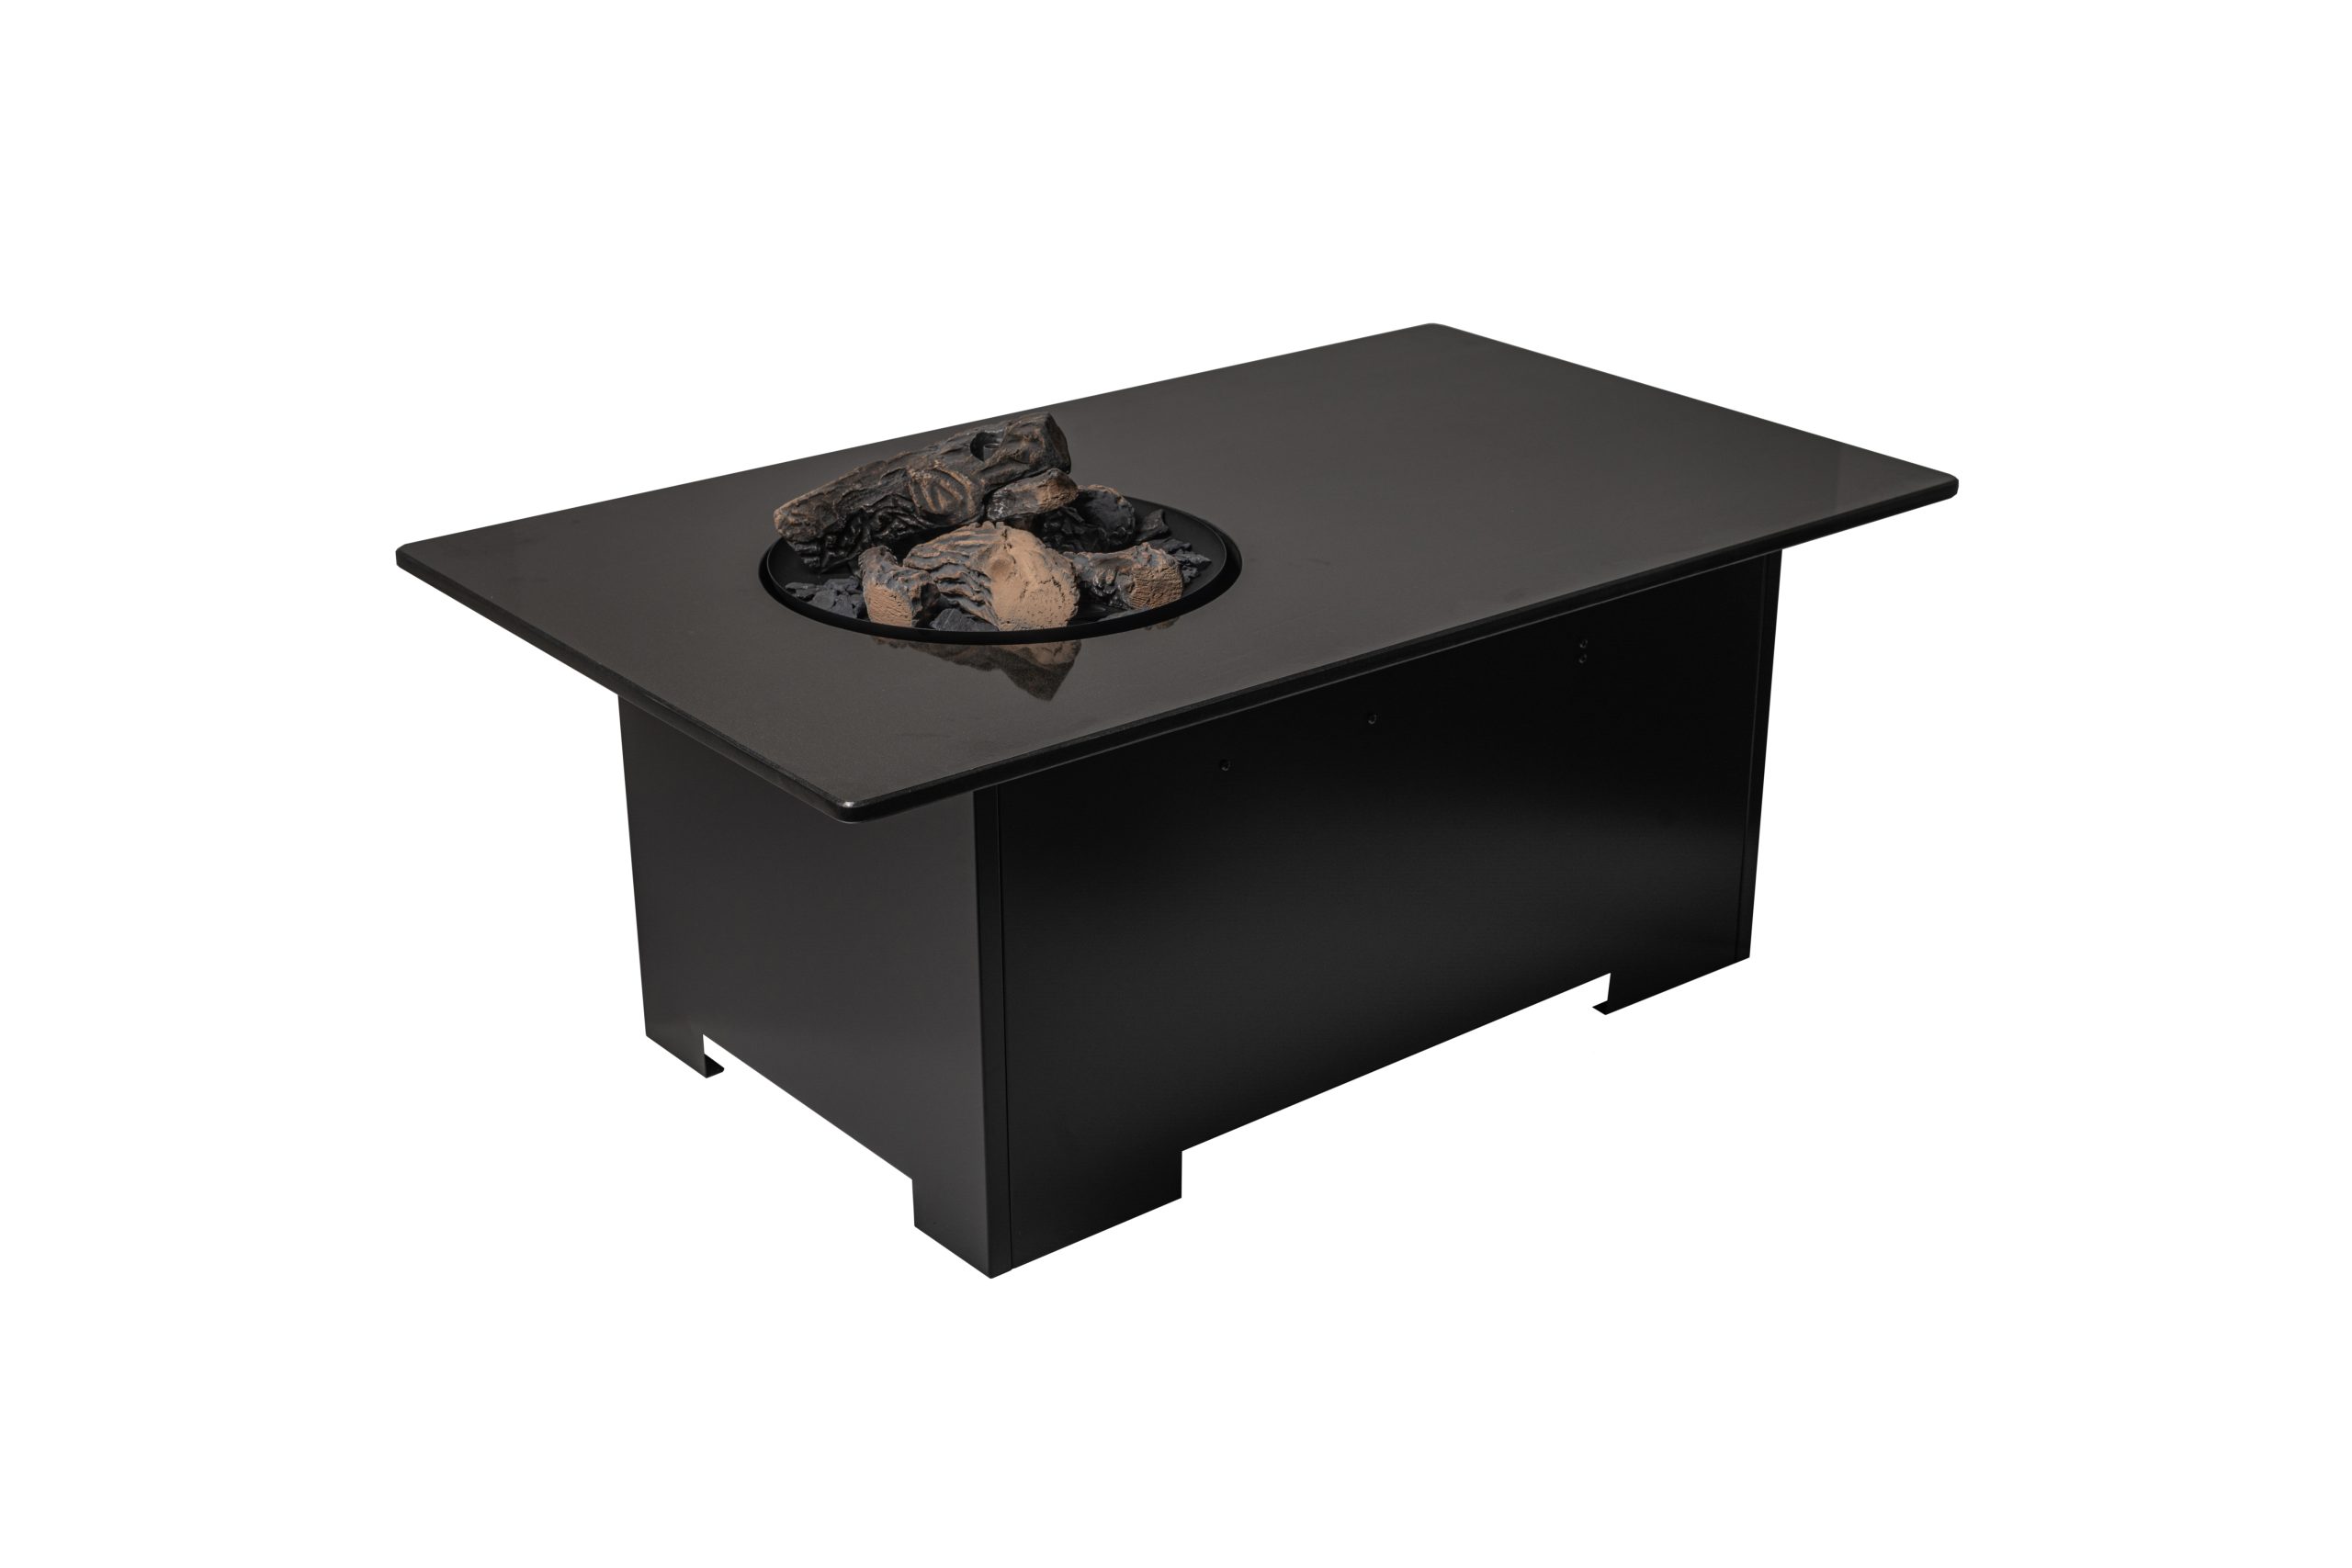 Jackson Grills MOUNTAINS WEST FIRE COFFEE TABLE